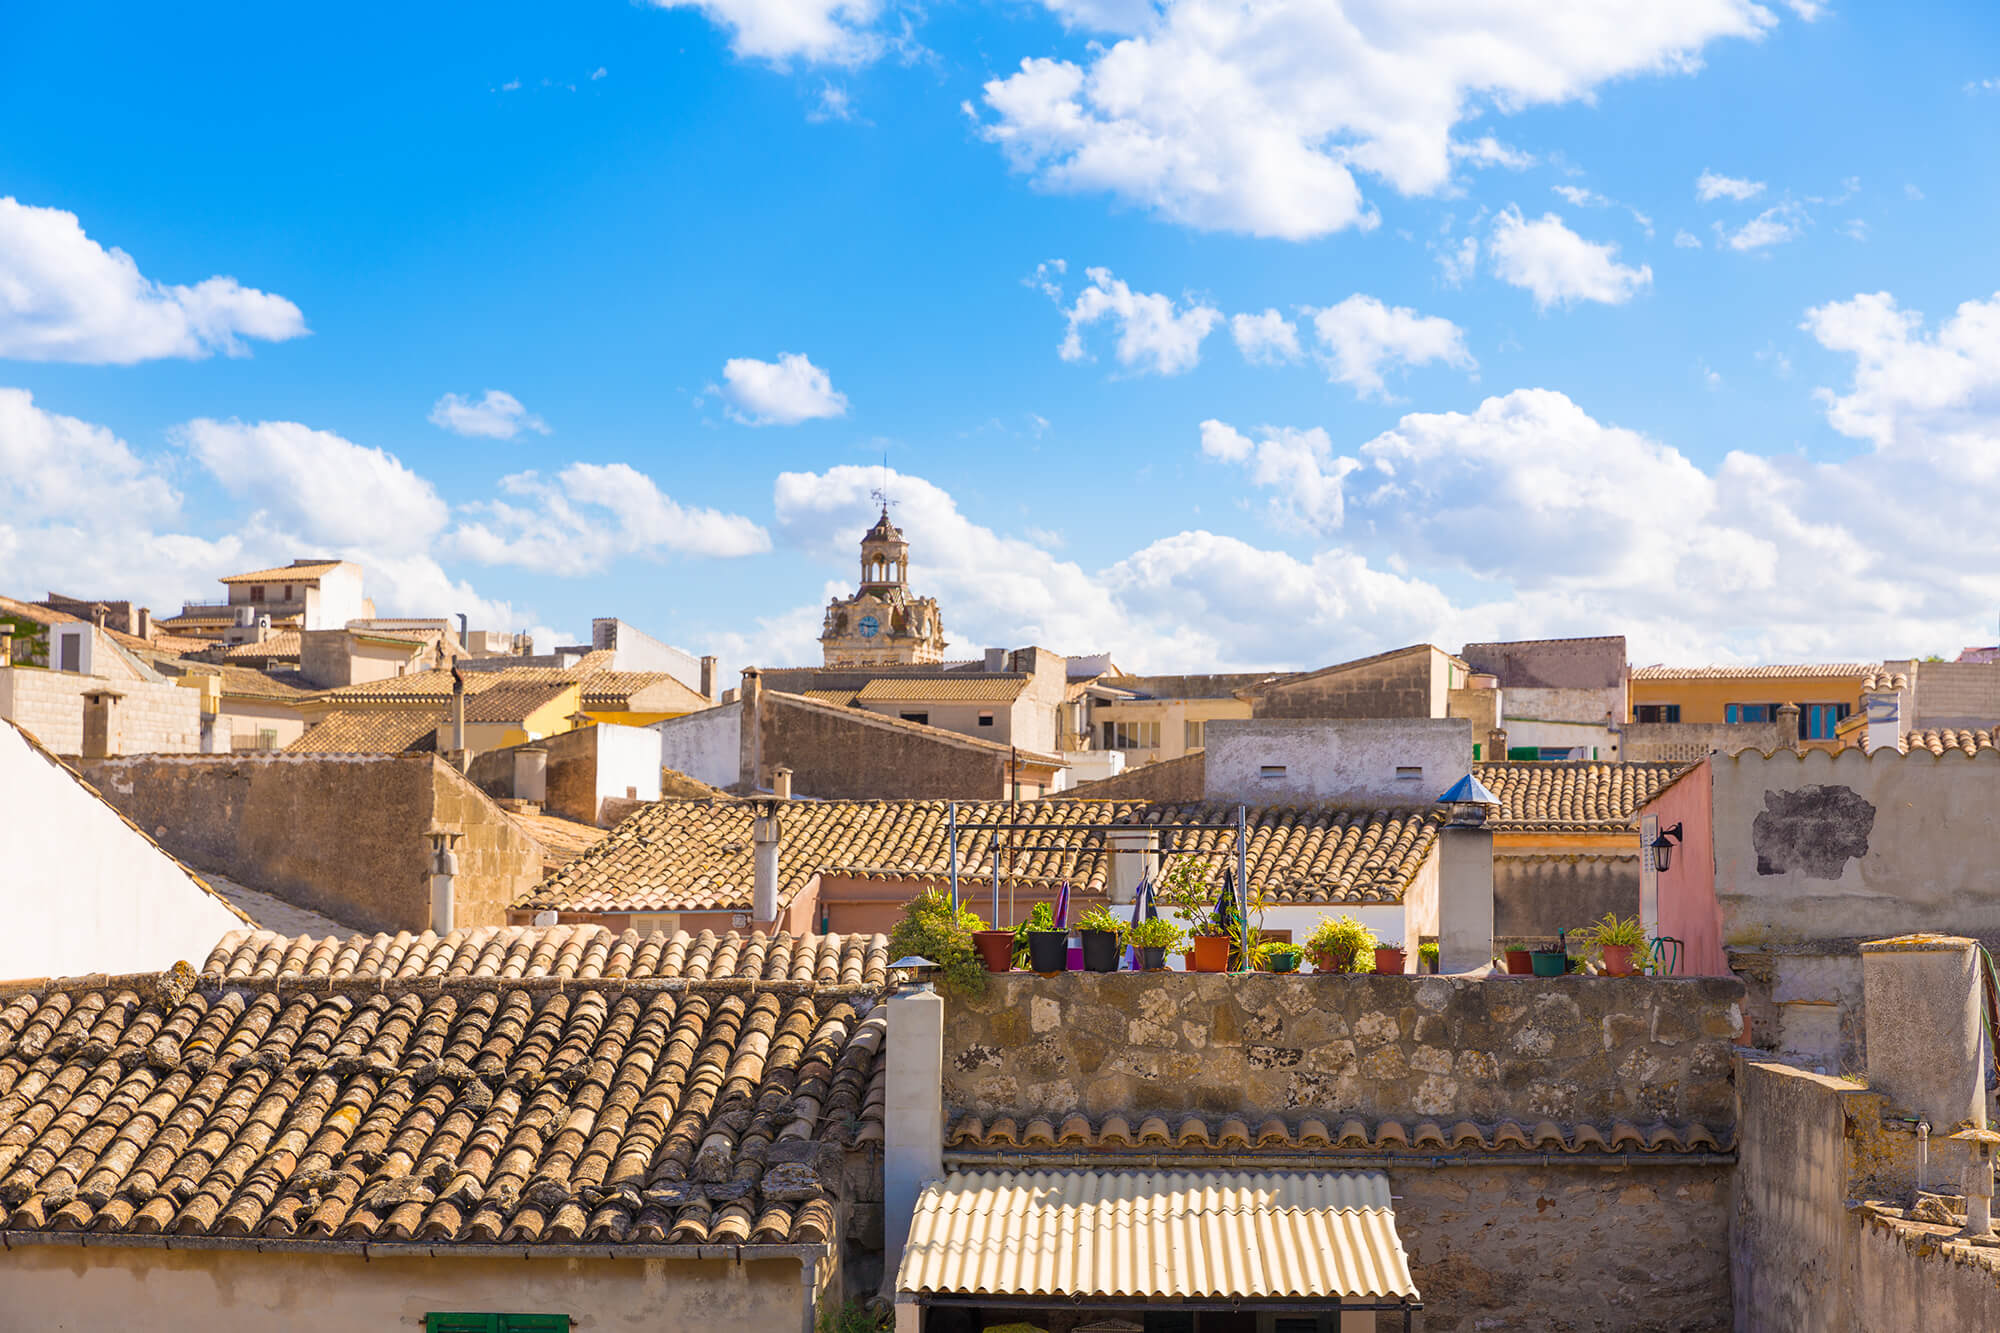 View over the roofs of the old town of Alcudia